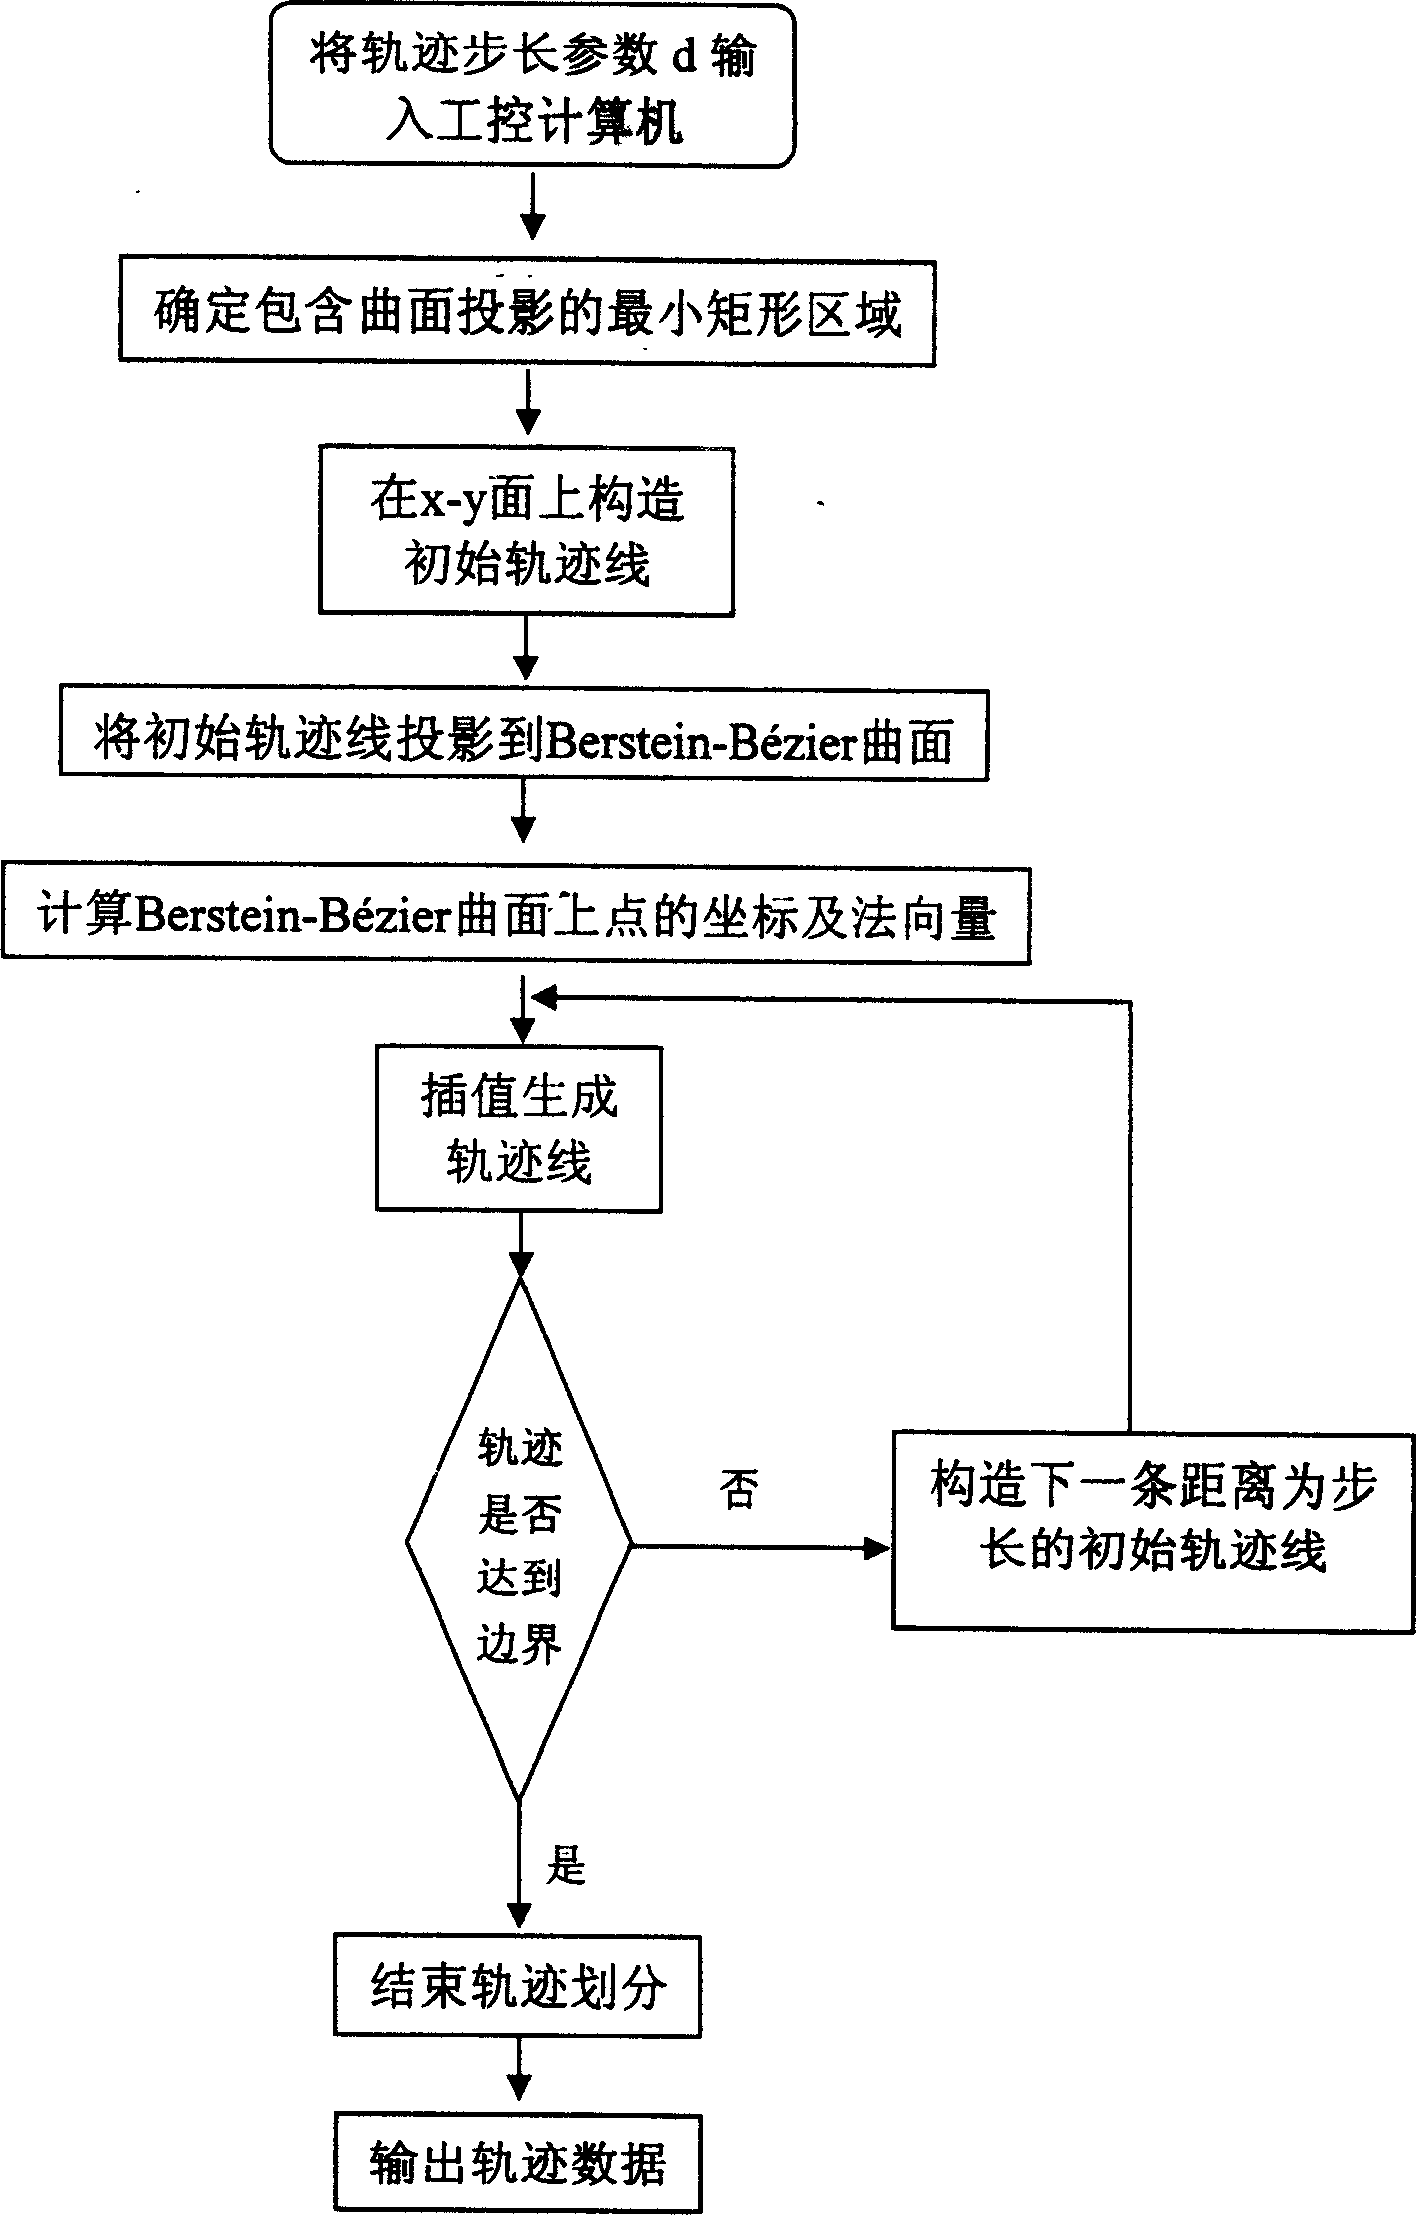 Method for conducting path planning based on three-dimensional scatter point set data of free camber